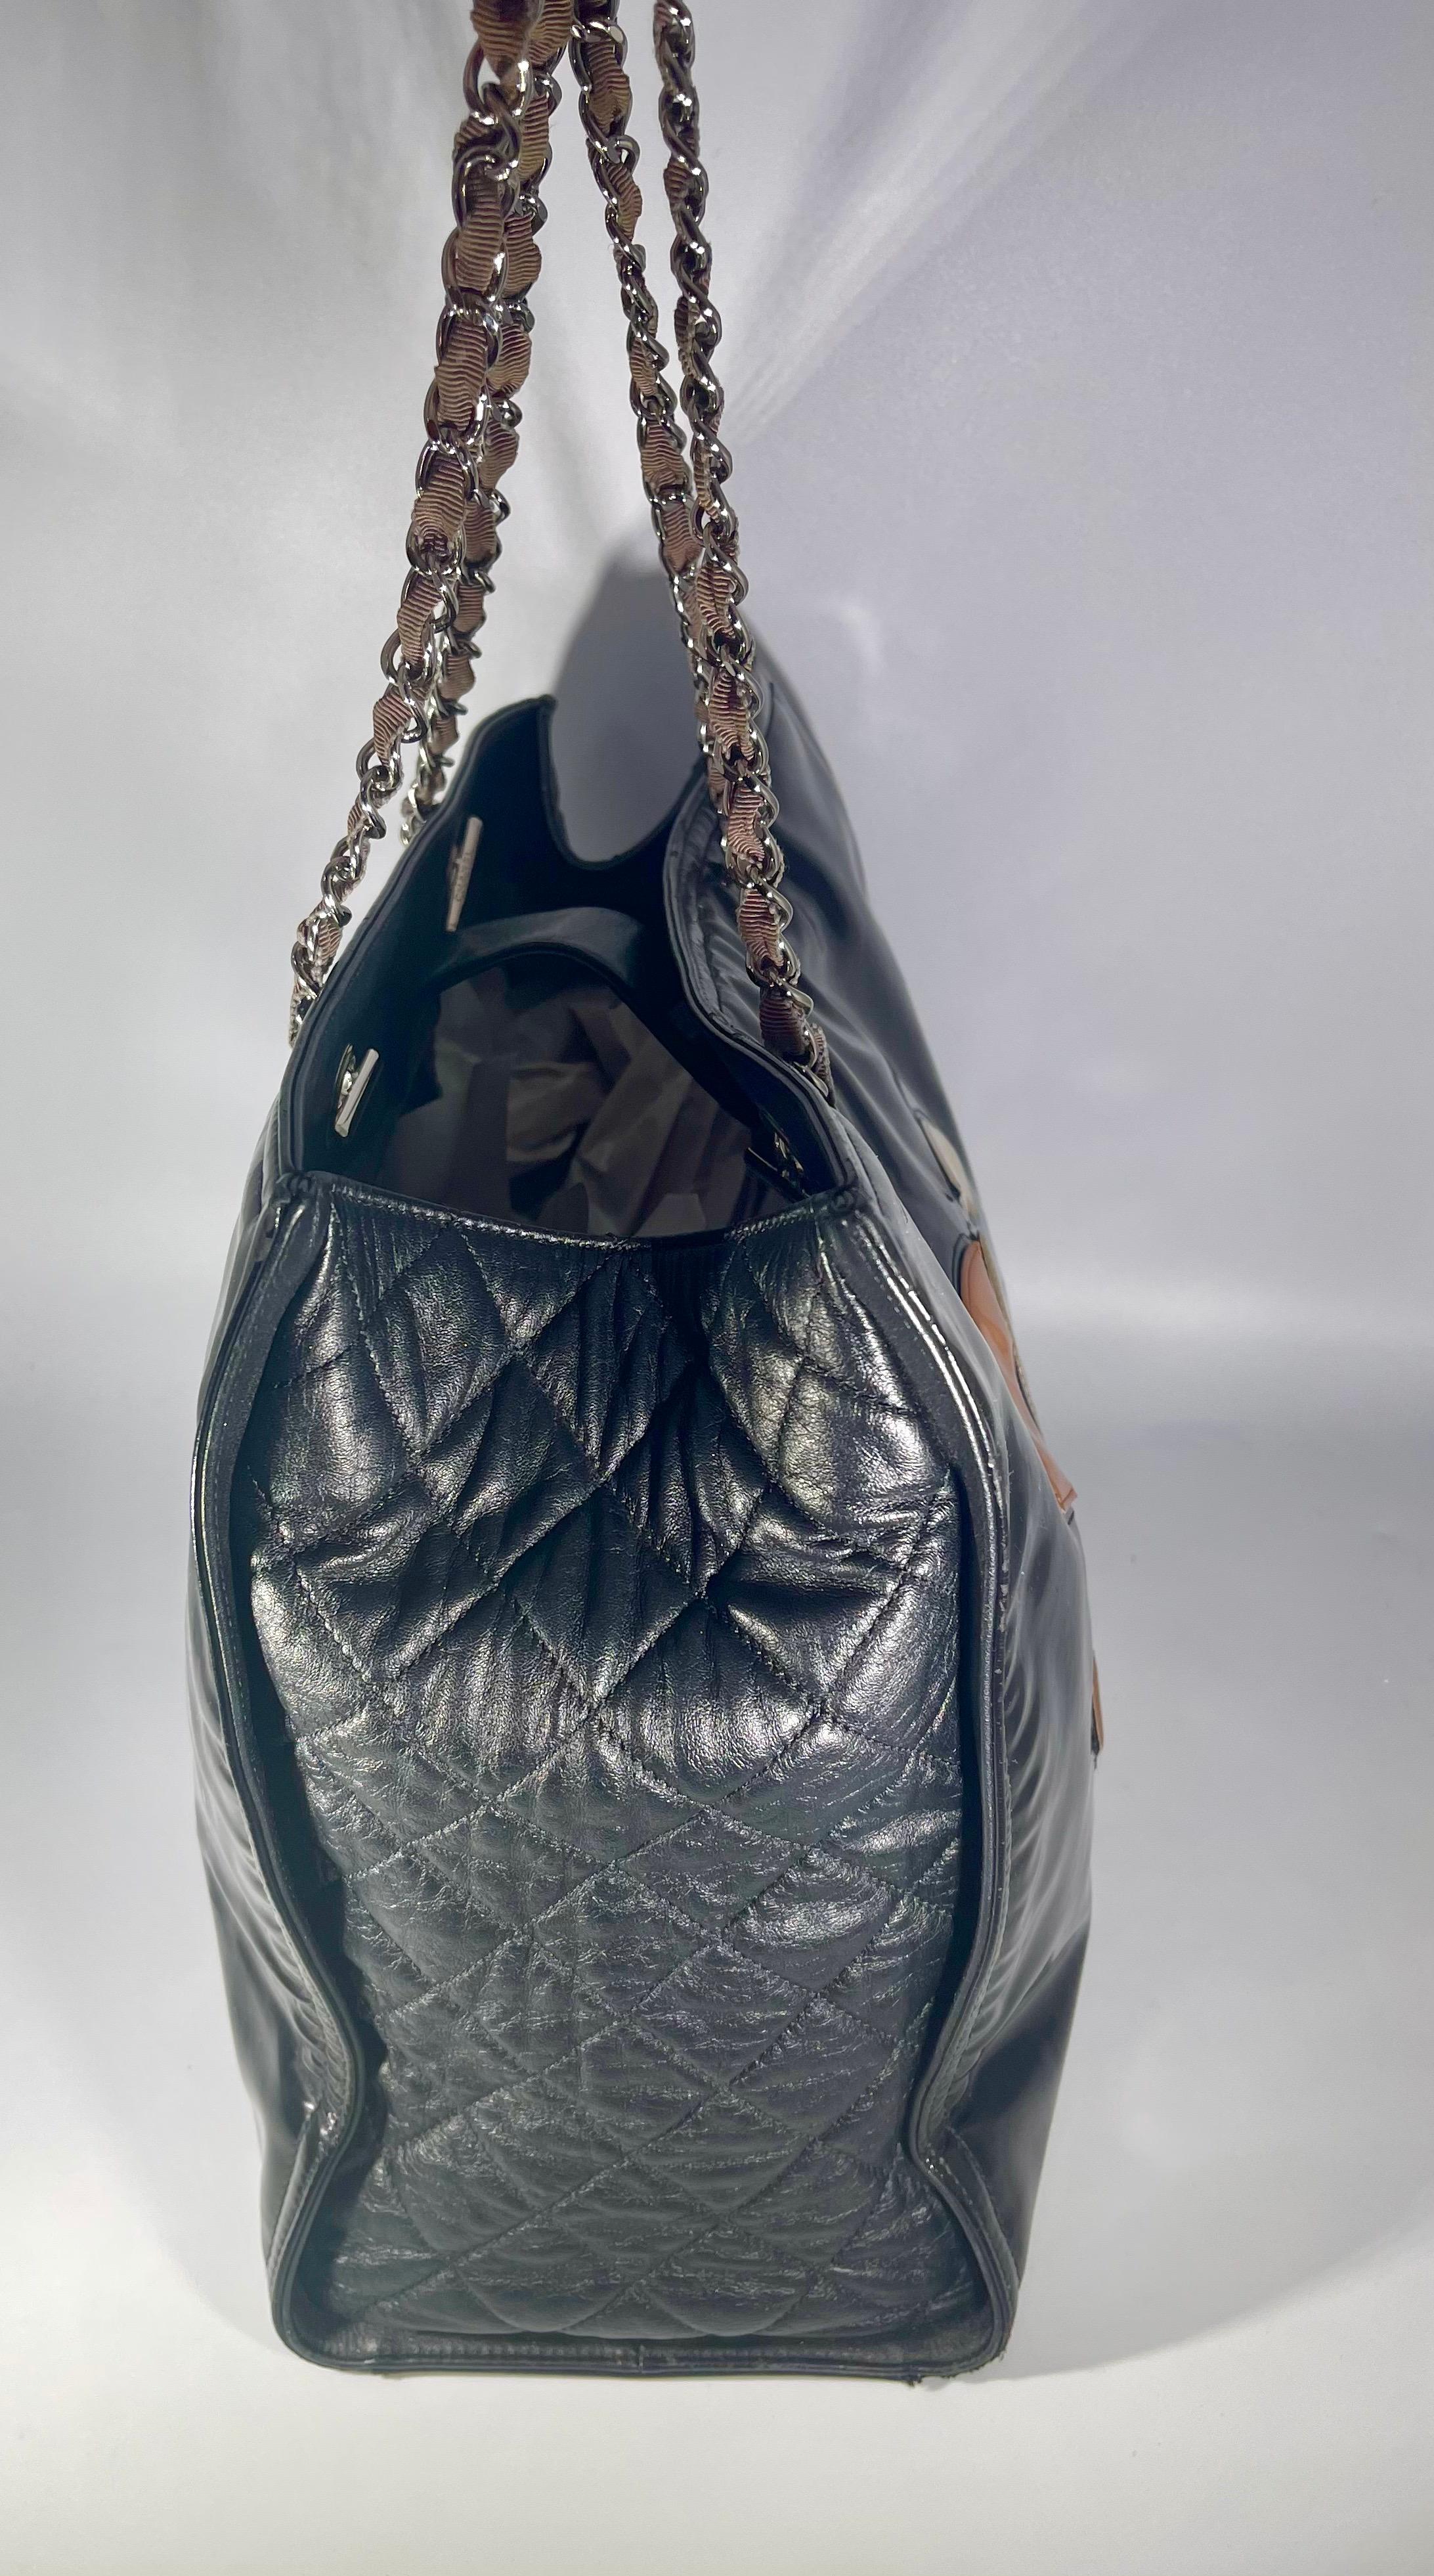  Chanel Lipstick Open Tote Patent Black Vinyl Large In Good Condition For Sale In New York, NY